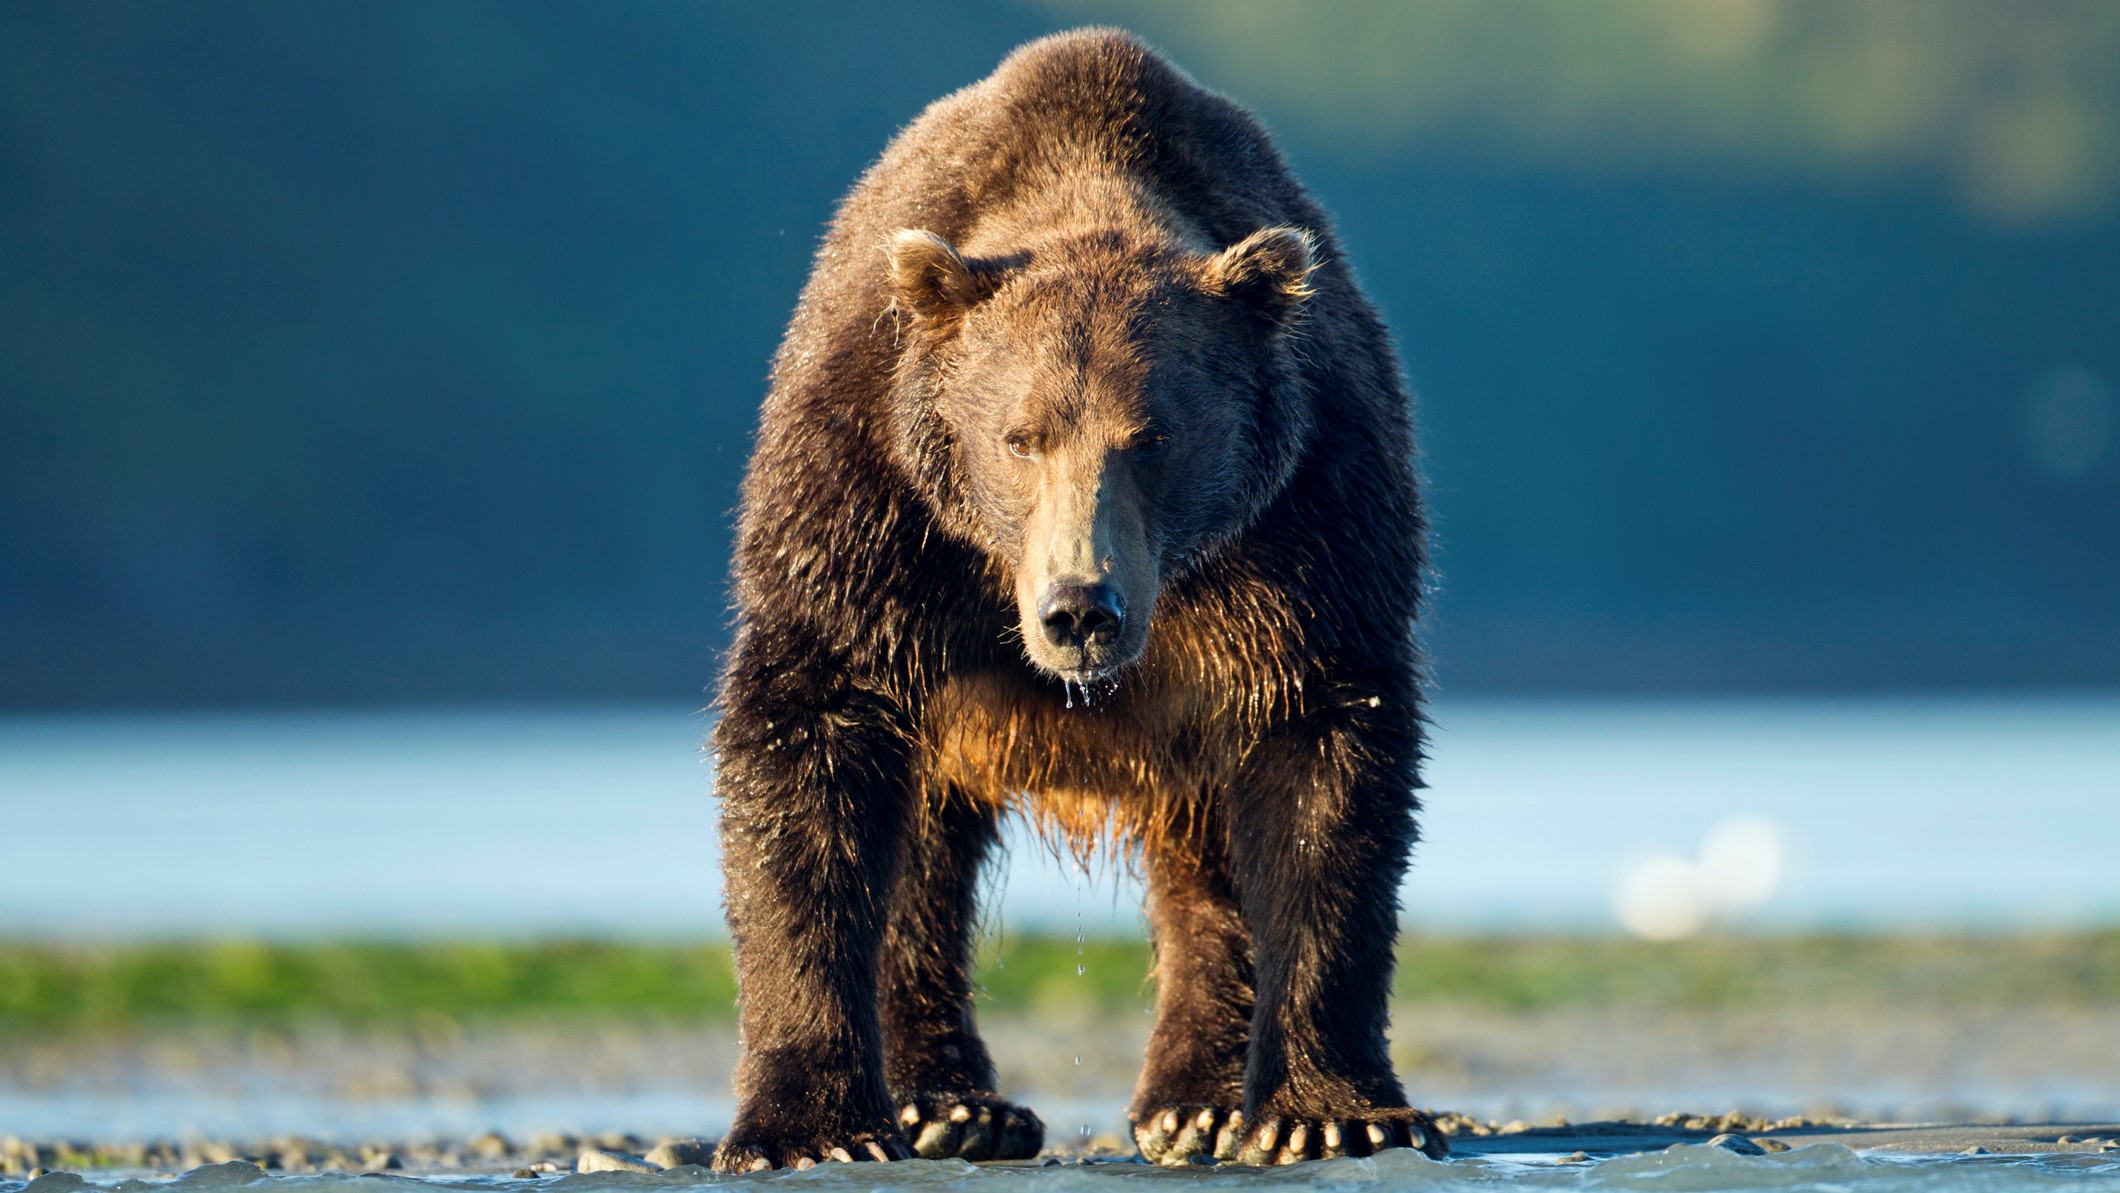 Woman Is Killed by a Bear Near Yellowstone, Officials Say - The